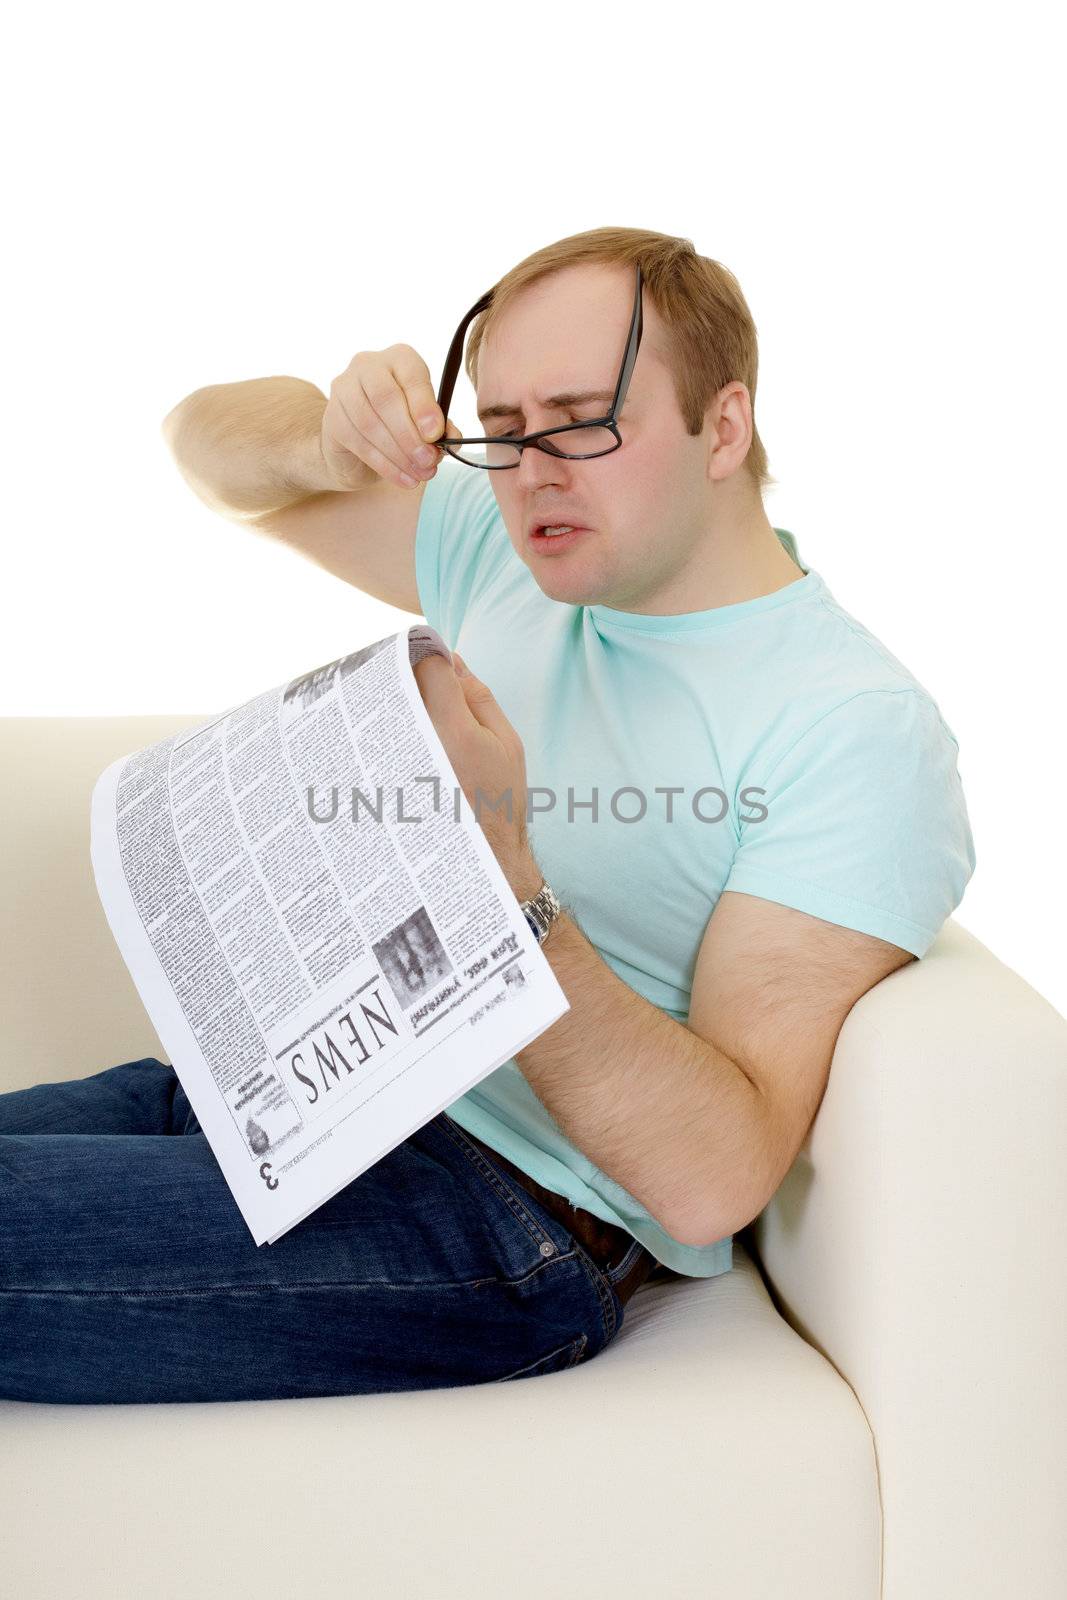 Funny man reading a job advertisement in newspaper by pzaxe